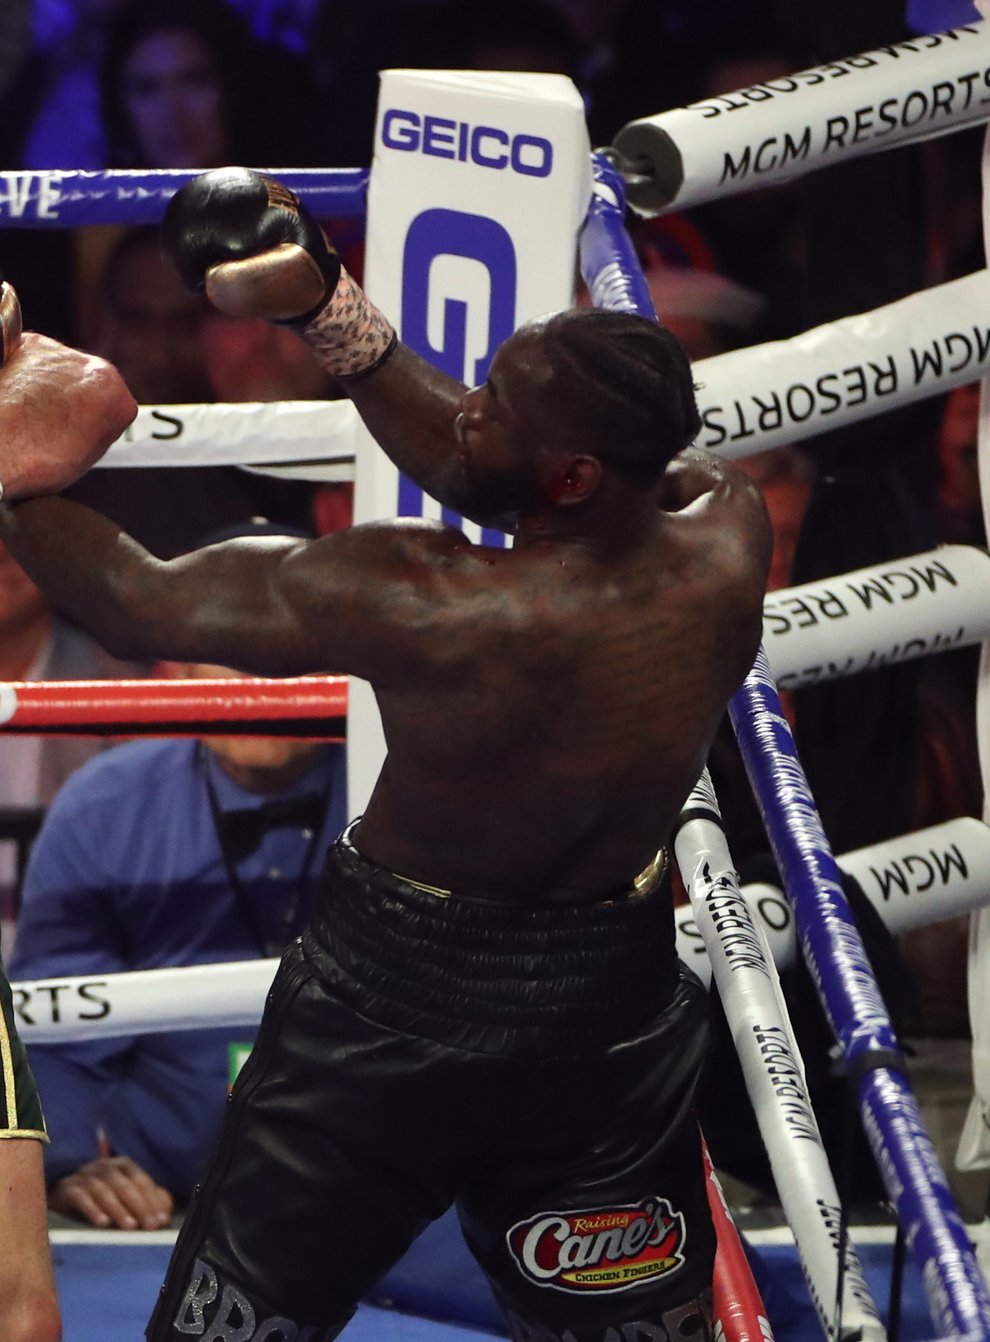 Fury is contractually obligated to give Wilder a third fight